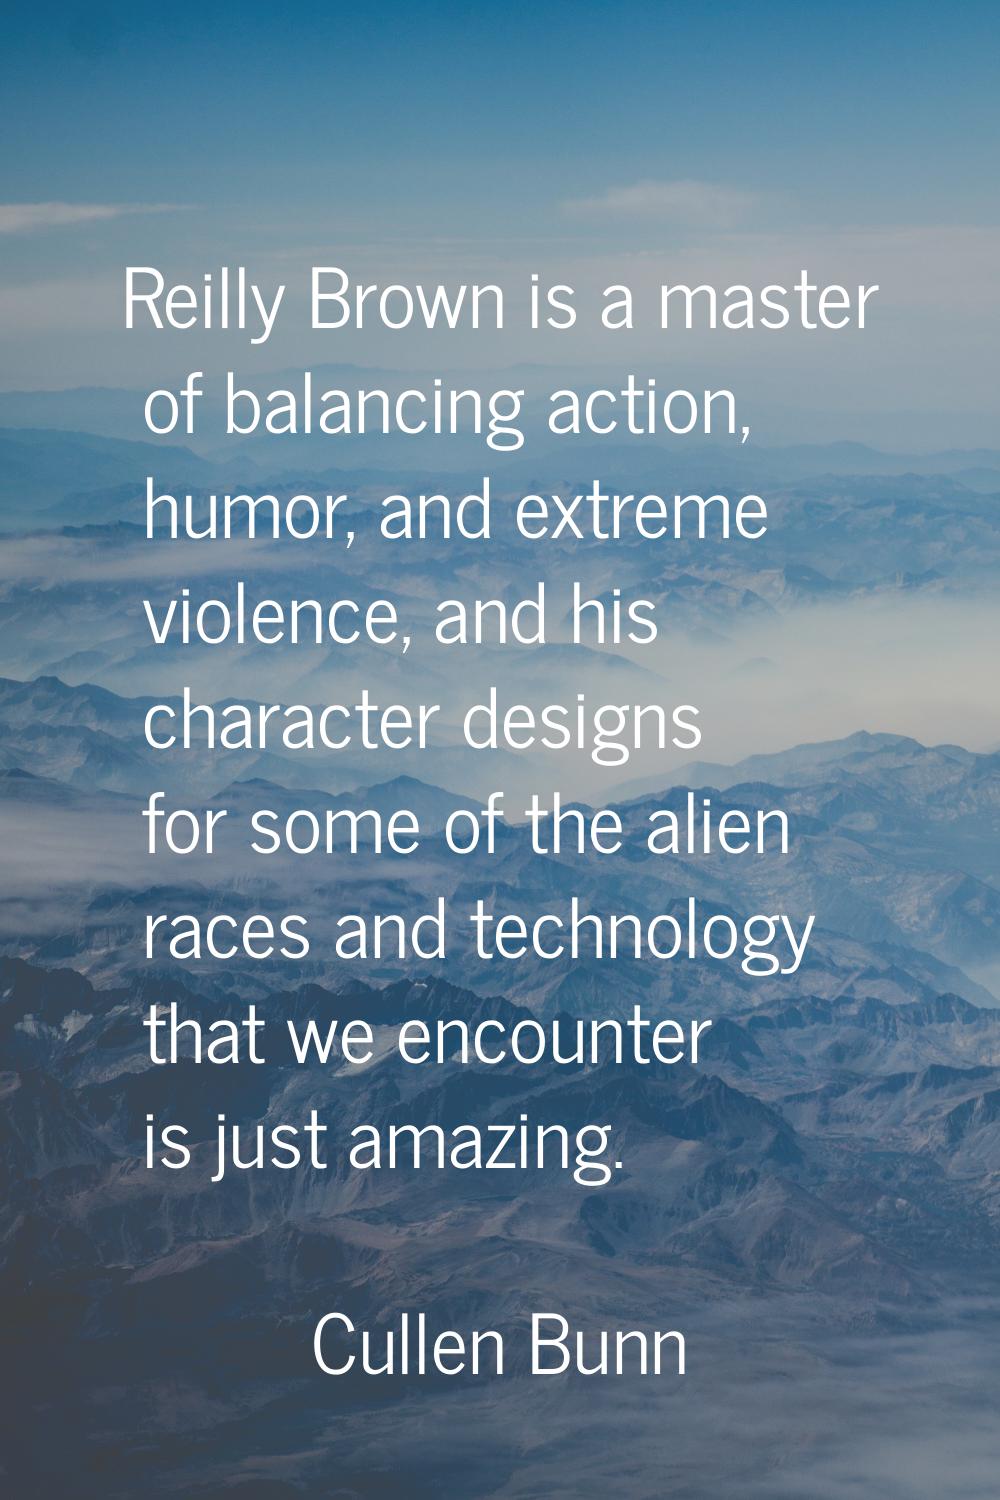 Reilly Brown is a master of balancing action, humor, and extreme violence, and his character design